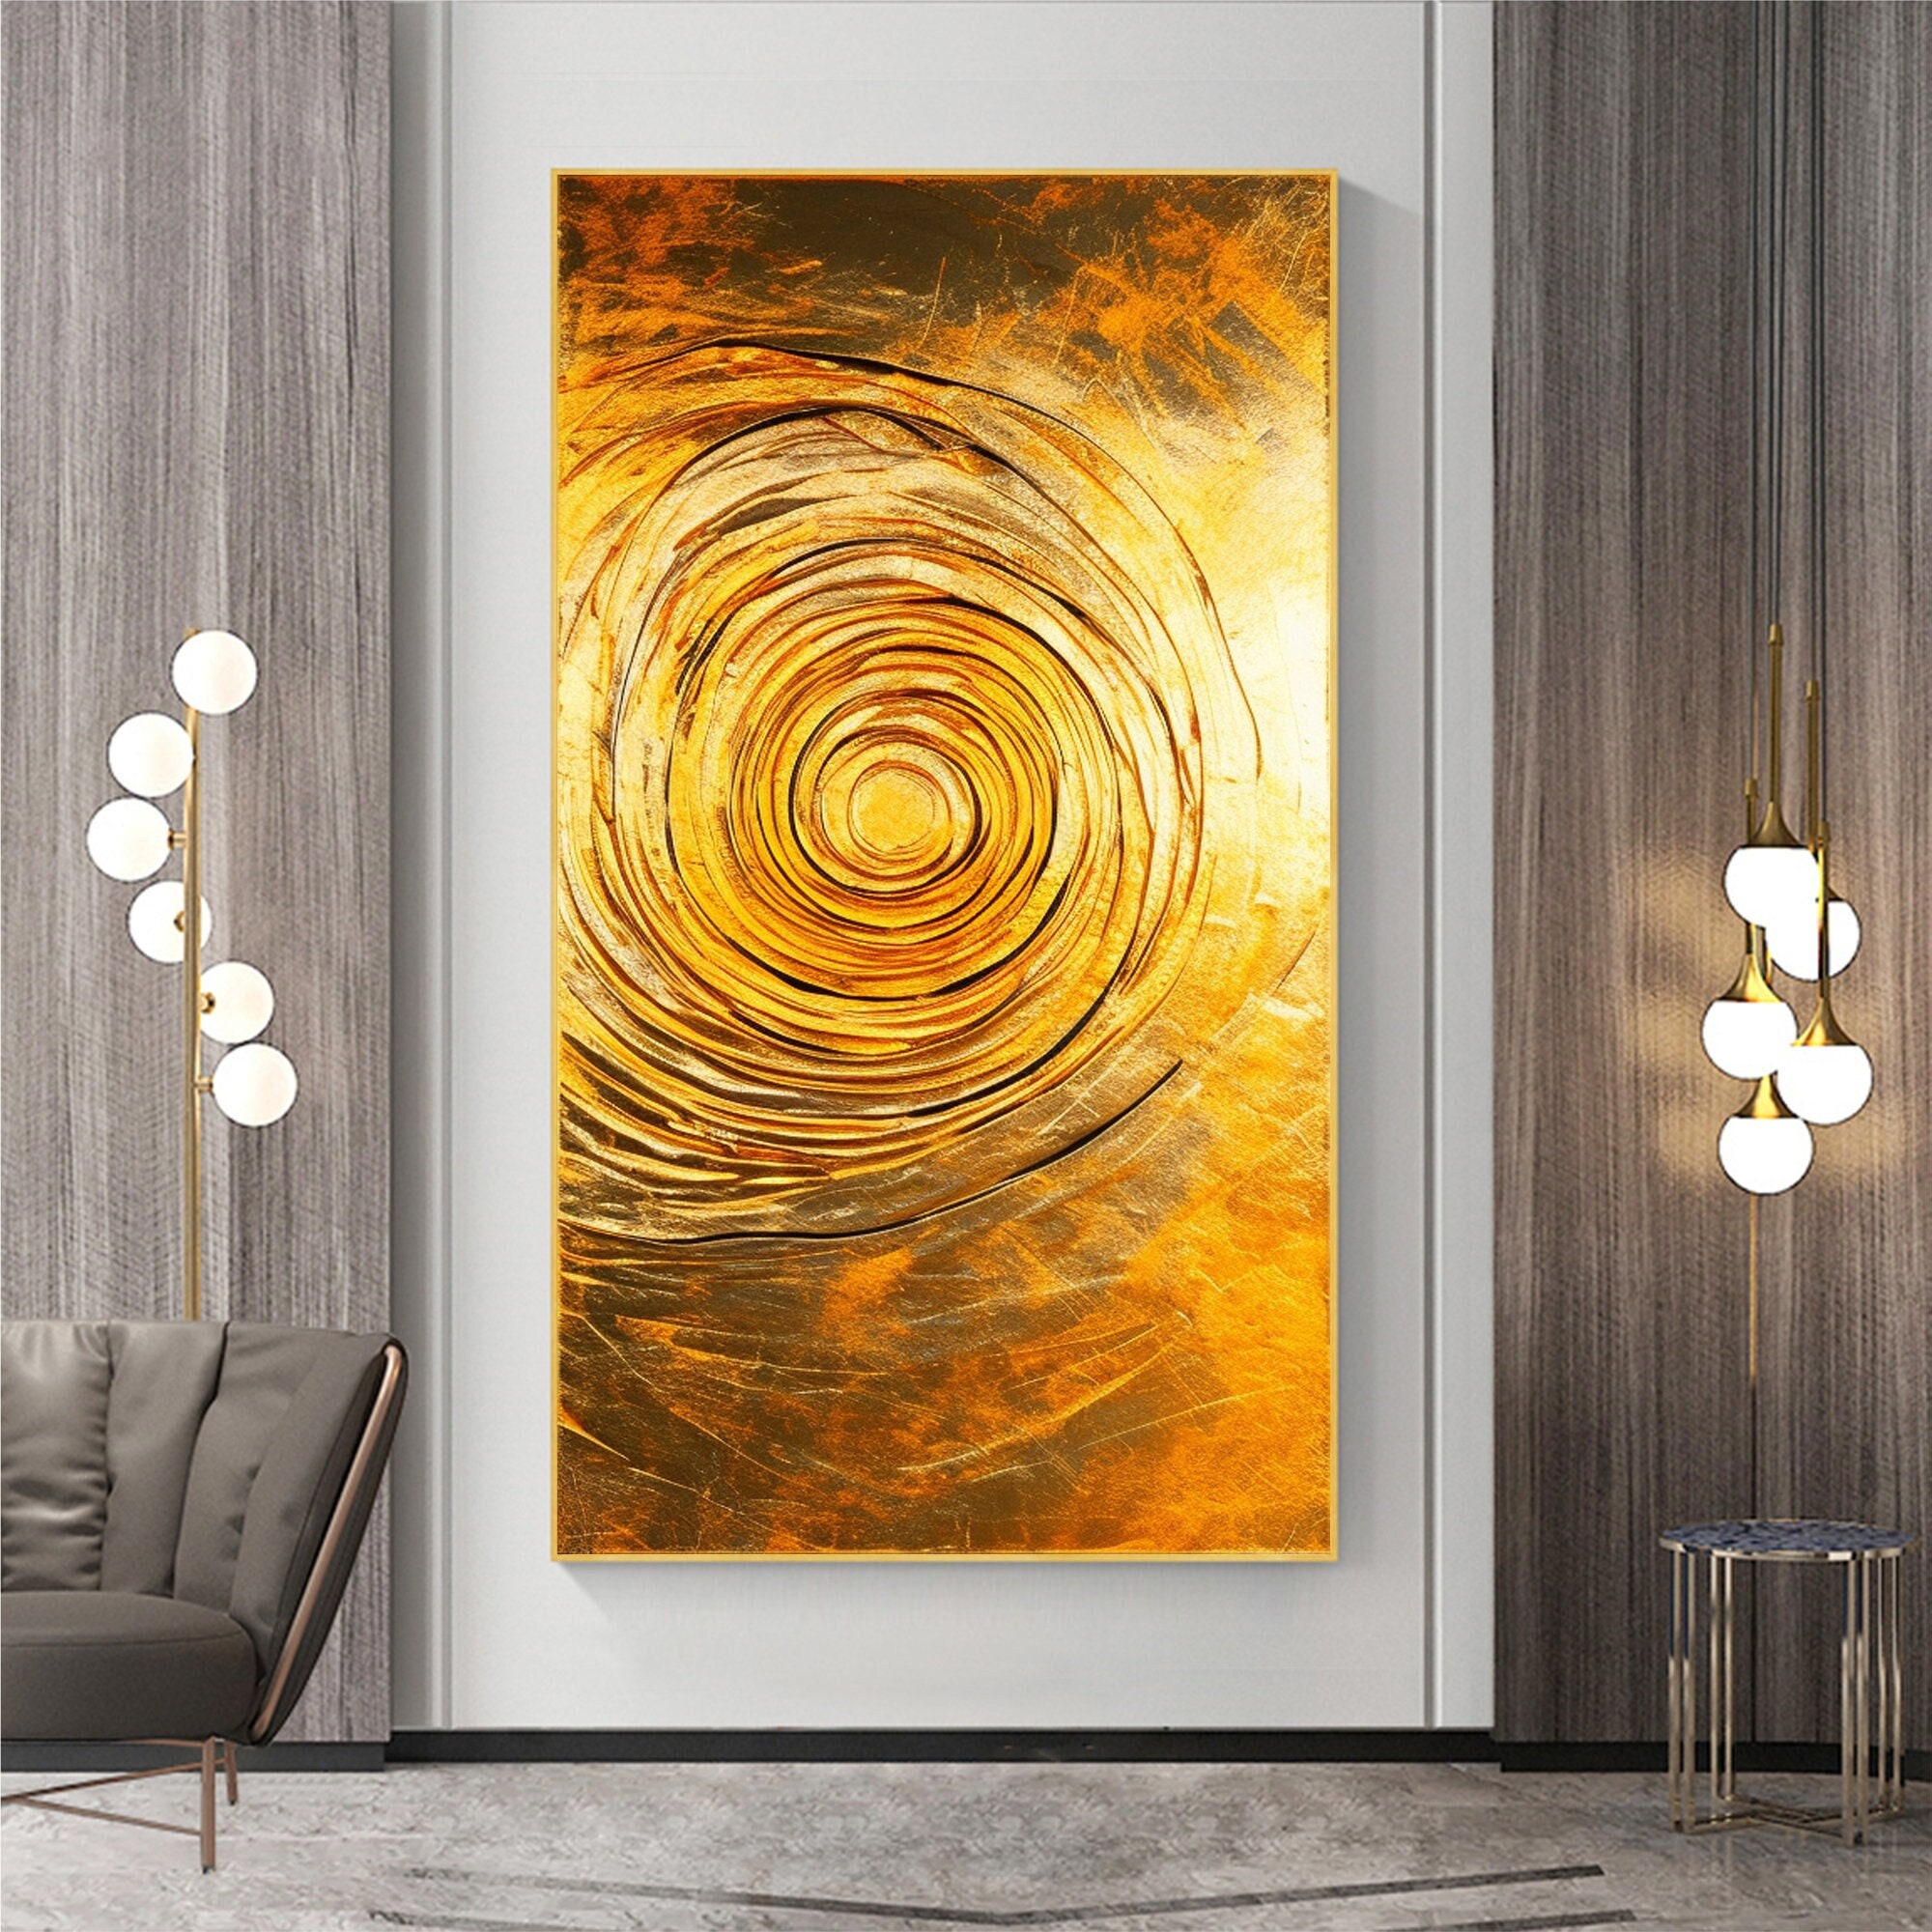 Minimalist Gold Circle Oil Painting on Canvas Large Wall Art - Etsy